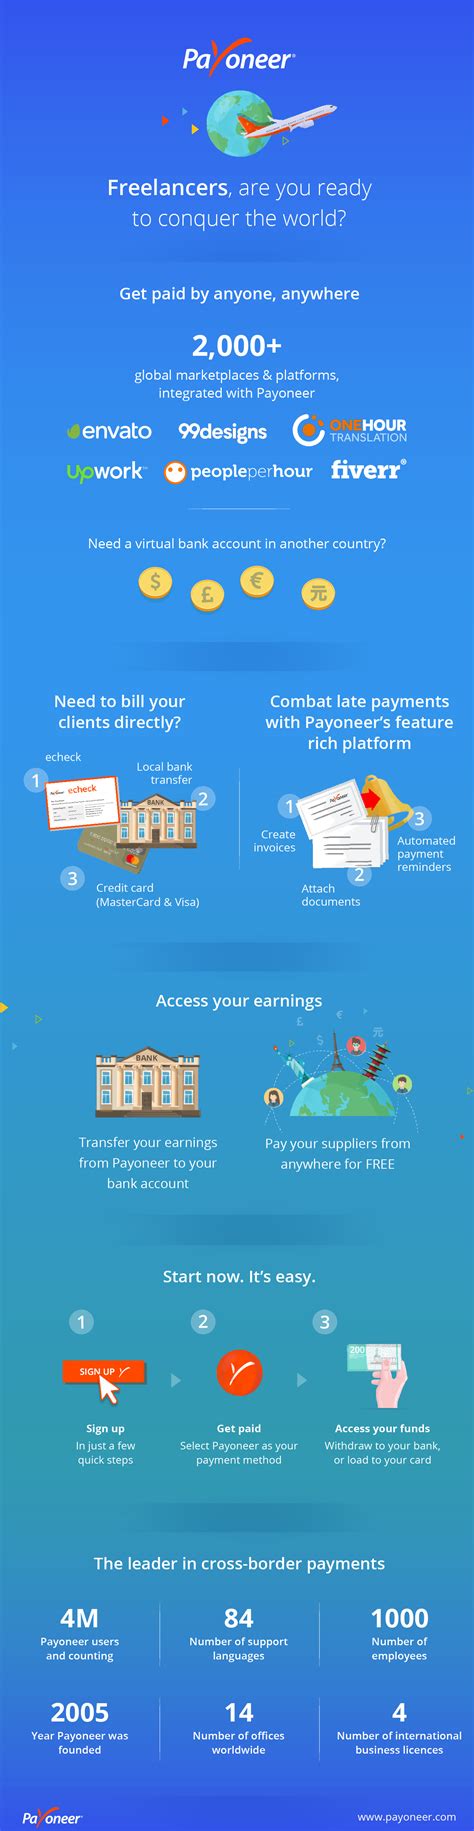 Whether you are a business owner, professional or freelancer, payoneer offers you multiple ways to get paid online by international clients and global marketplaces. How And Where To Use Payoneer Card In ATM Of Pakistan ...